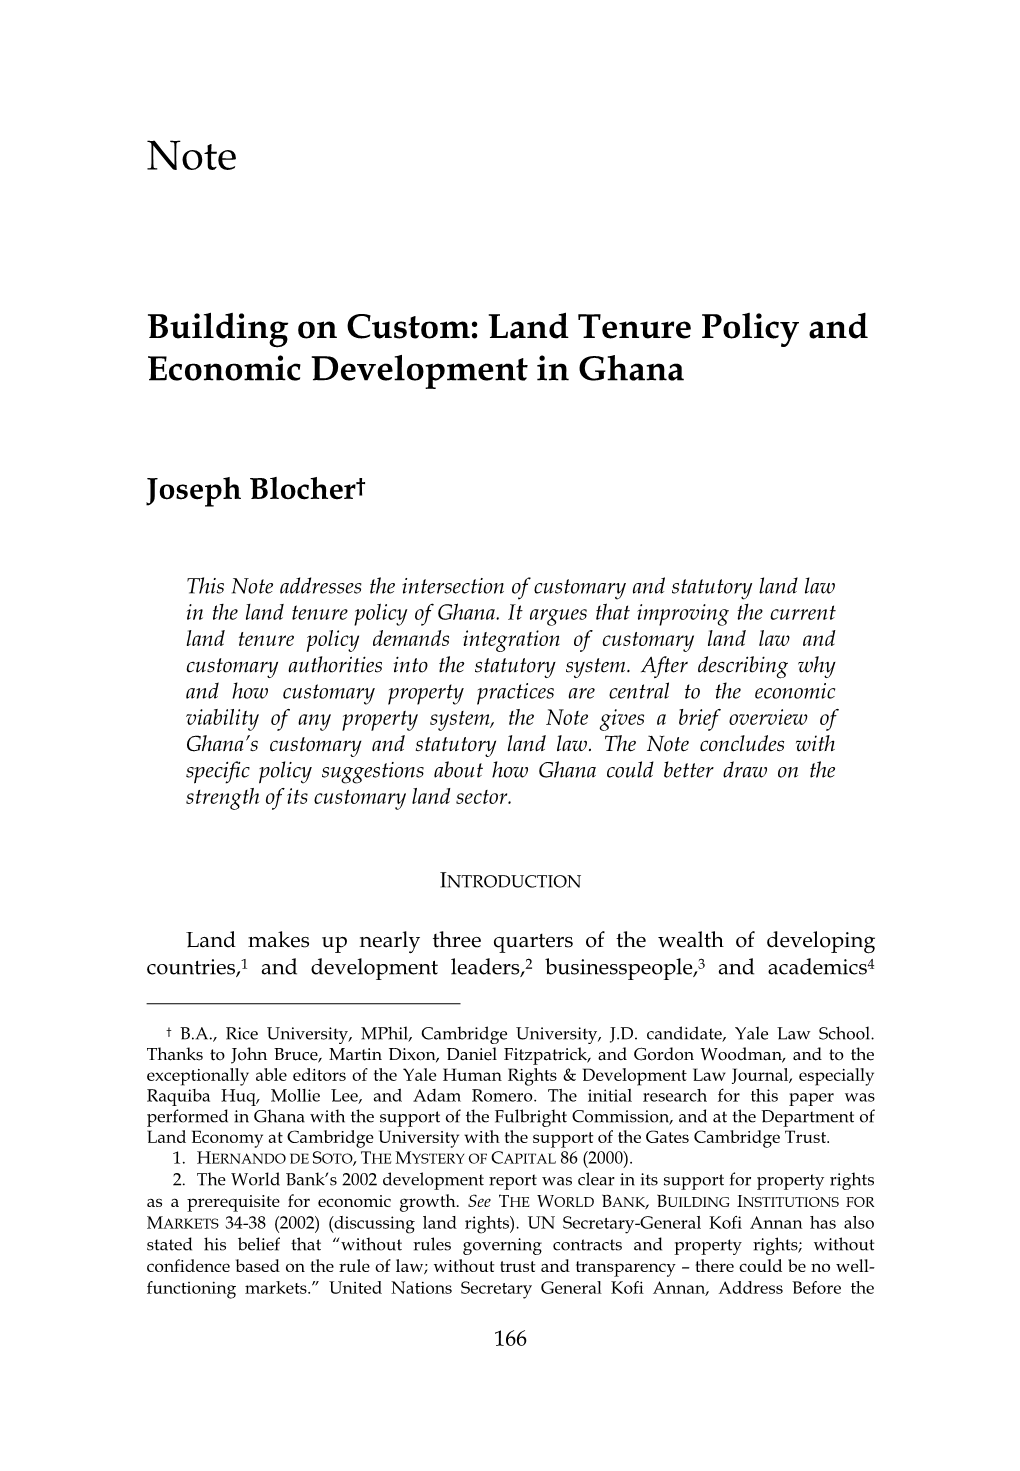 Building on Custom: Land Tenure Policy and Economic Development in Ghana